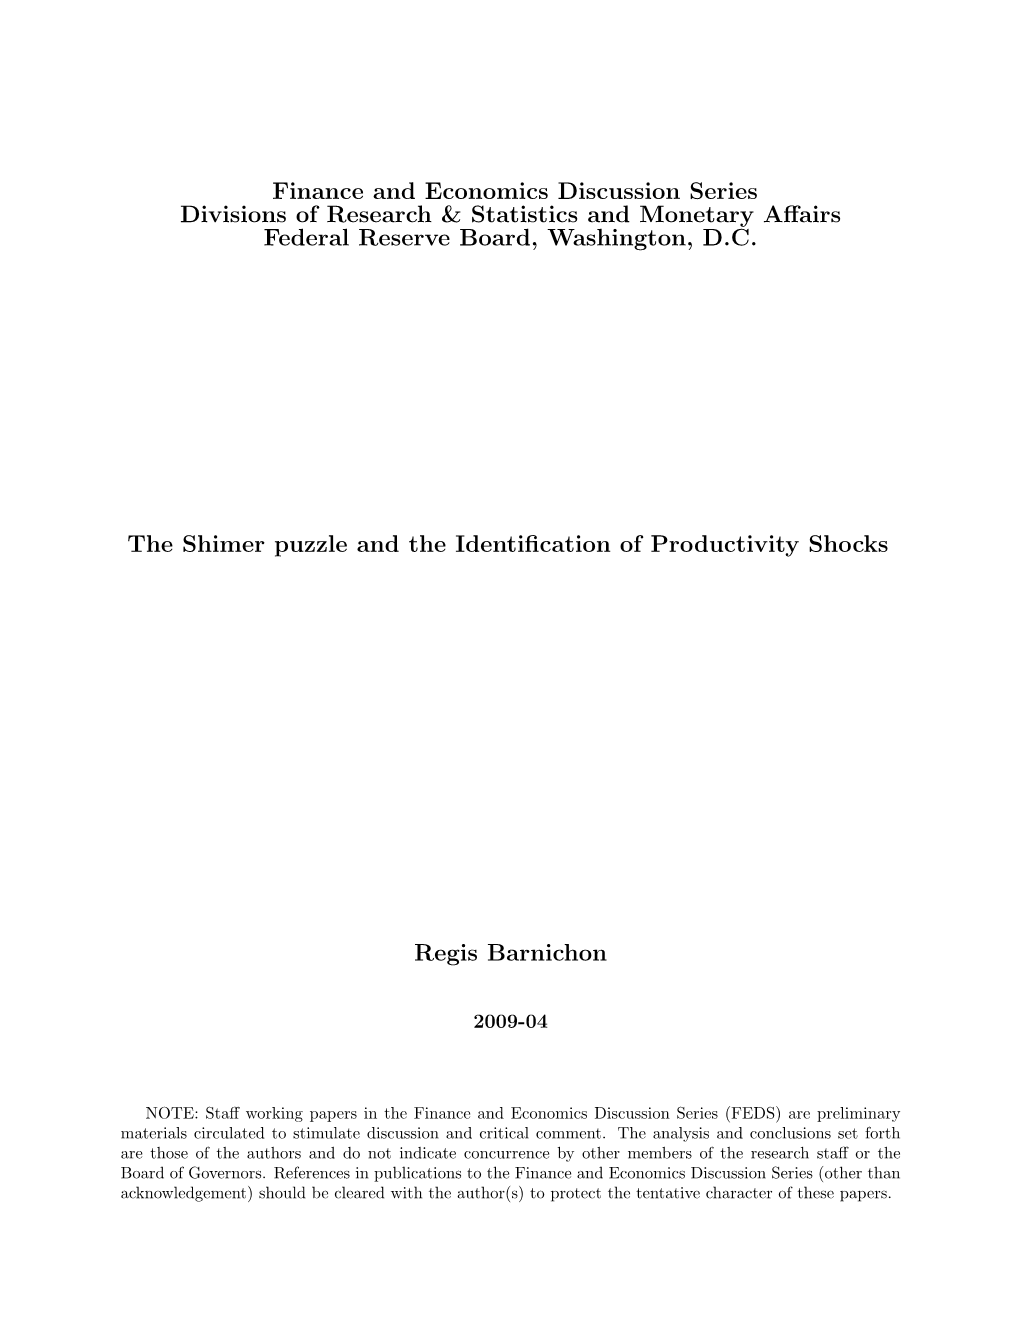 The Shimer Puzzle and the Identification of Productivity Shocks